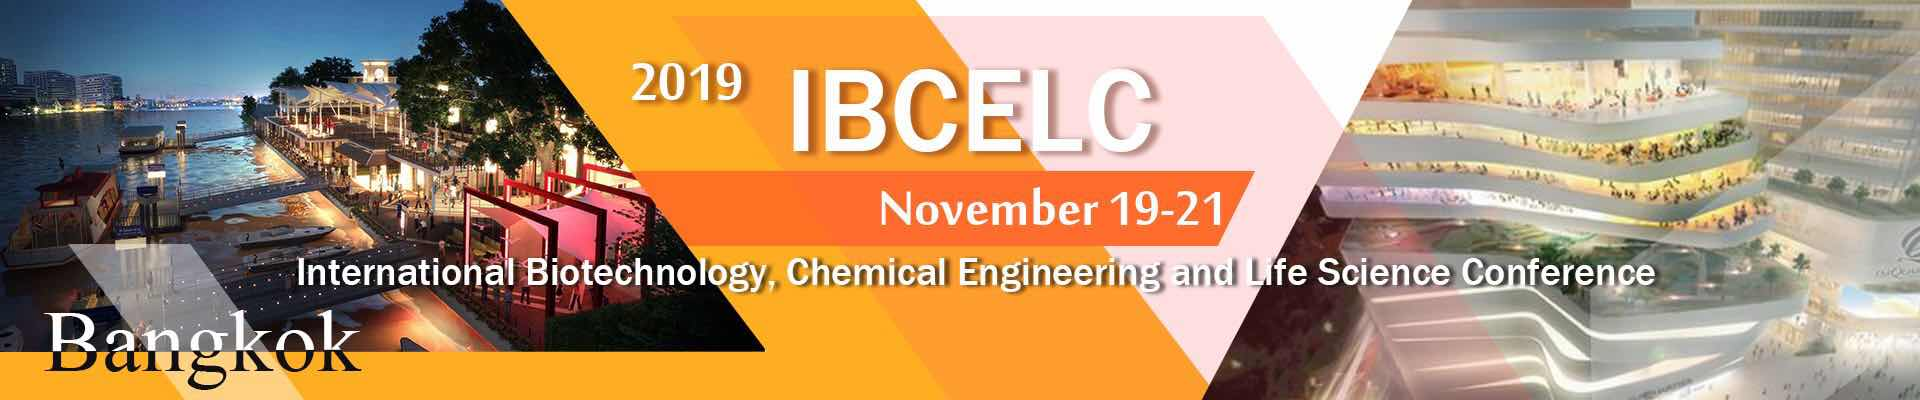 2019 Bangkok IBCELC International Biotechnology, Chemical Engineering and Life Science Conference